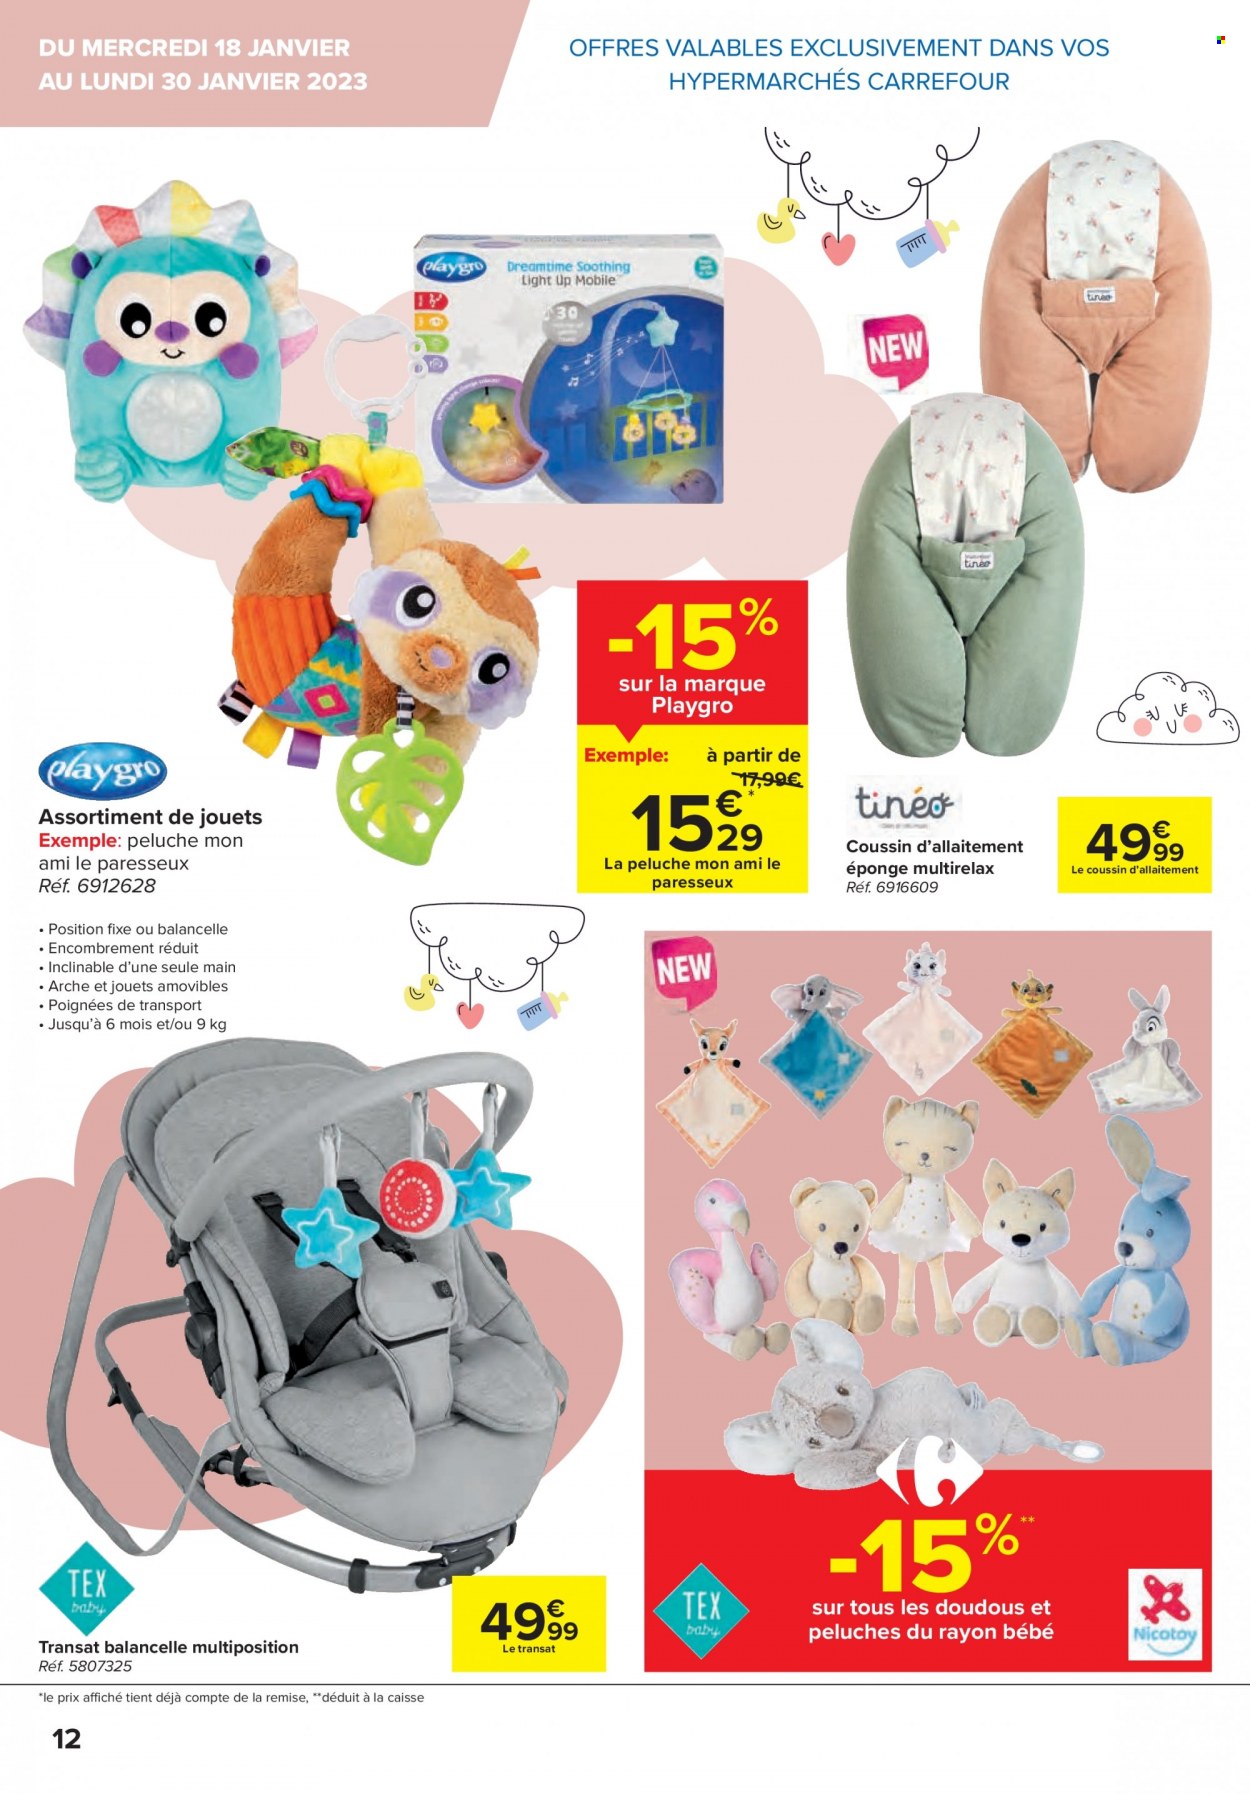 Catalogue Carrefour hypermarkt - 18.1.2023 - 30.1.2023. Page 12.